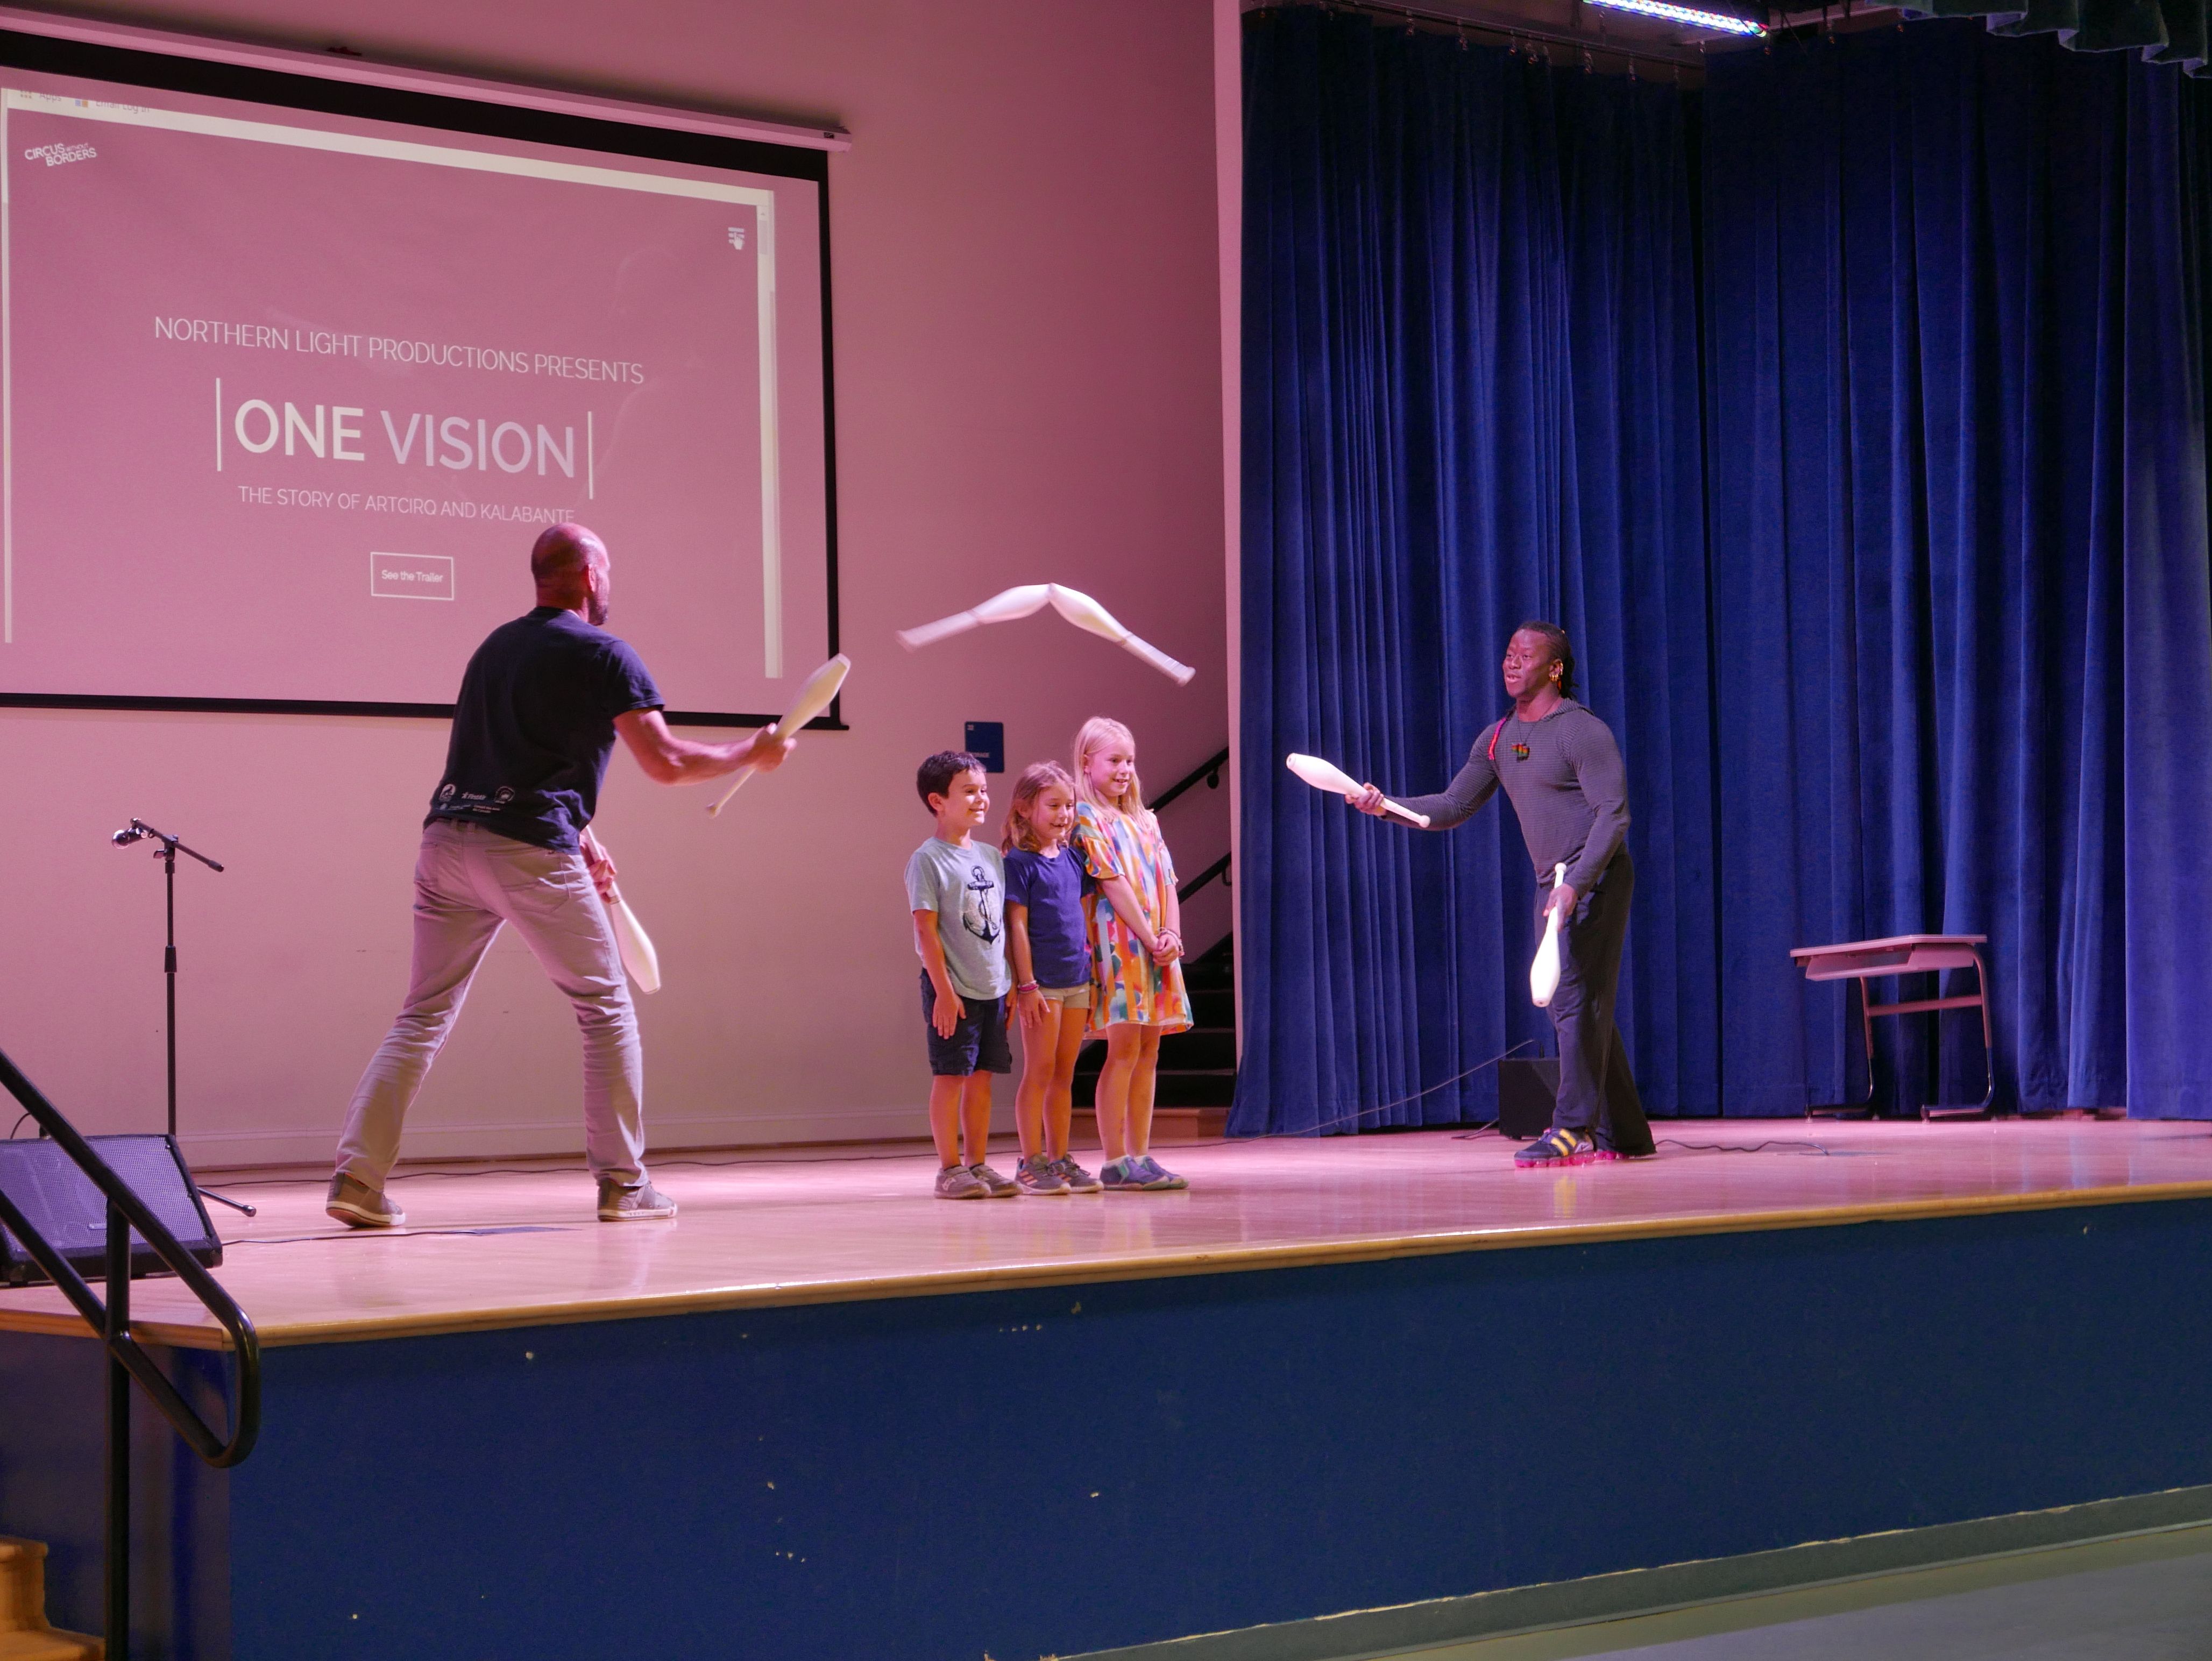 Guillaume Saladin and Yamoussa Bangoura present and perform for DC students at Hearst Elementary School after a screening of Circus Without Borders. Image by Meerabelle Jesuthasan. USA, 2019.